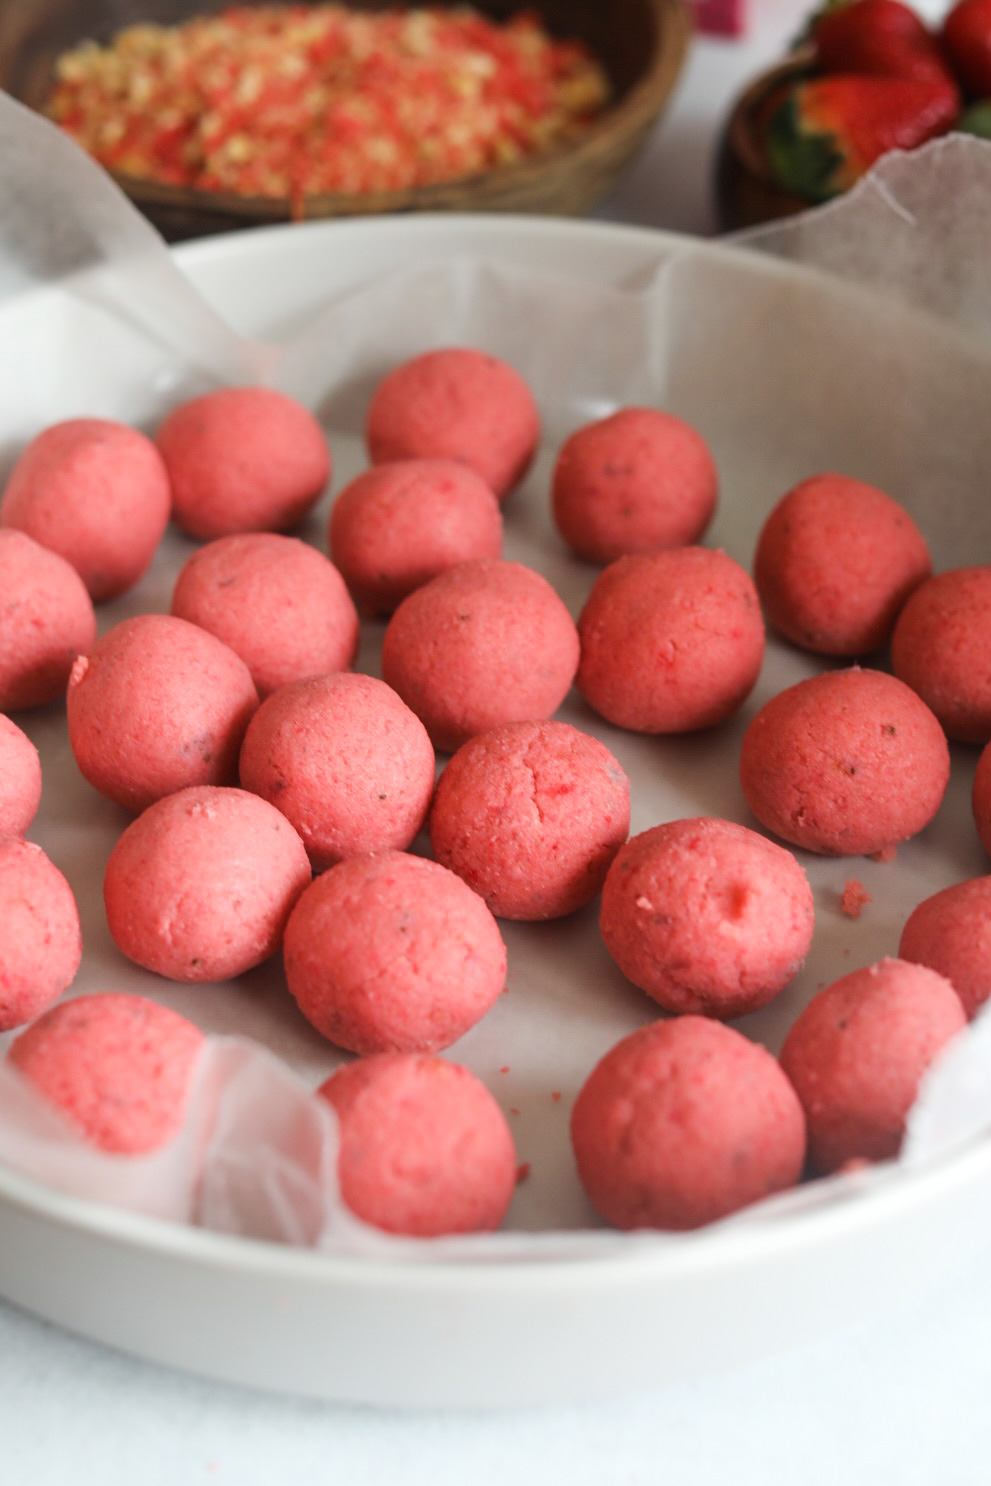 Strawberry cake pop in balls, about 24 balls in a lined grey large deep dish. Out of focus is the strawberry crunch in a wooden bowl.